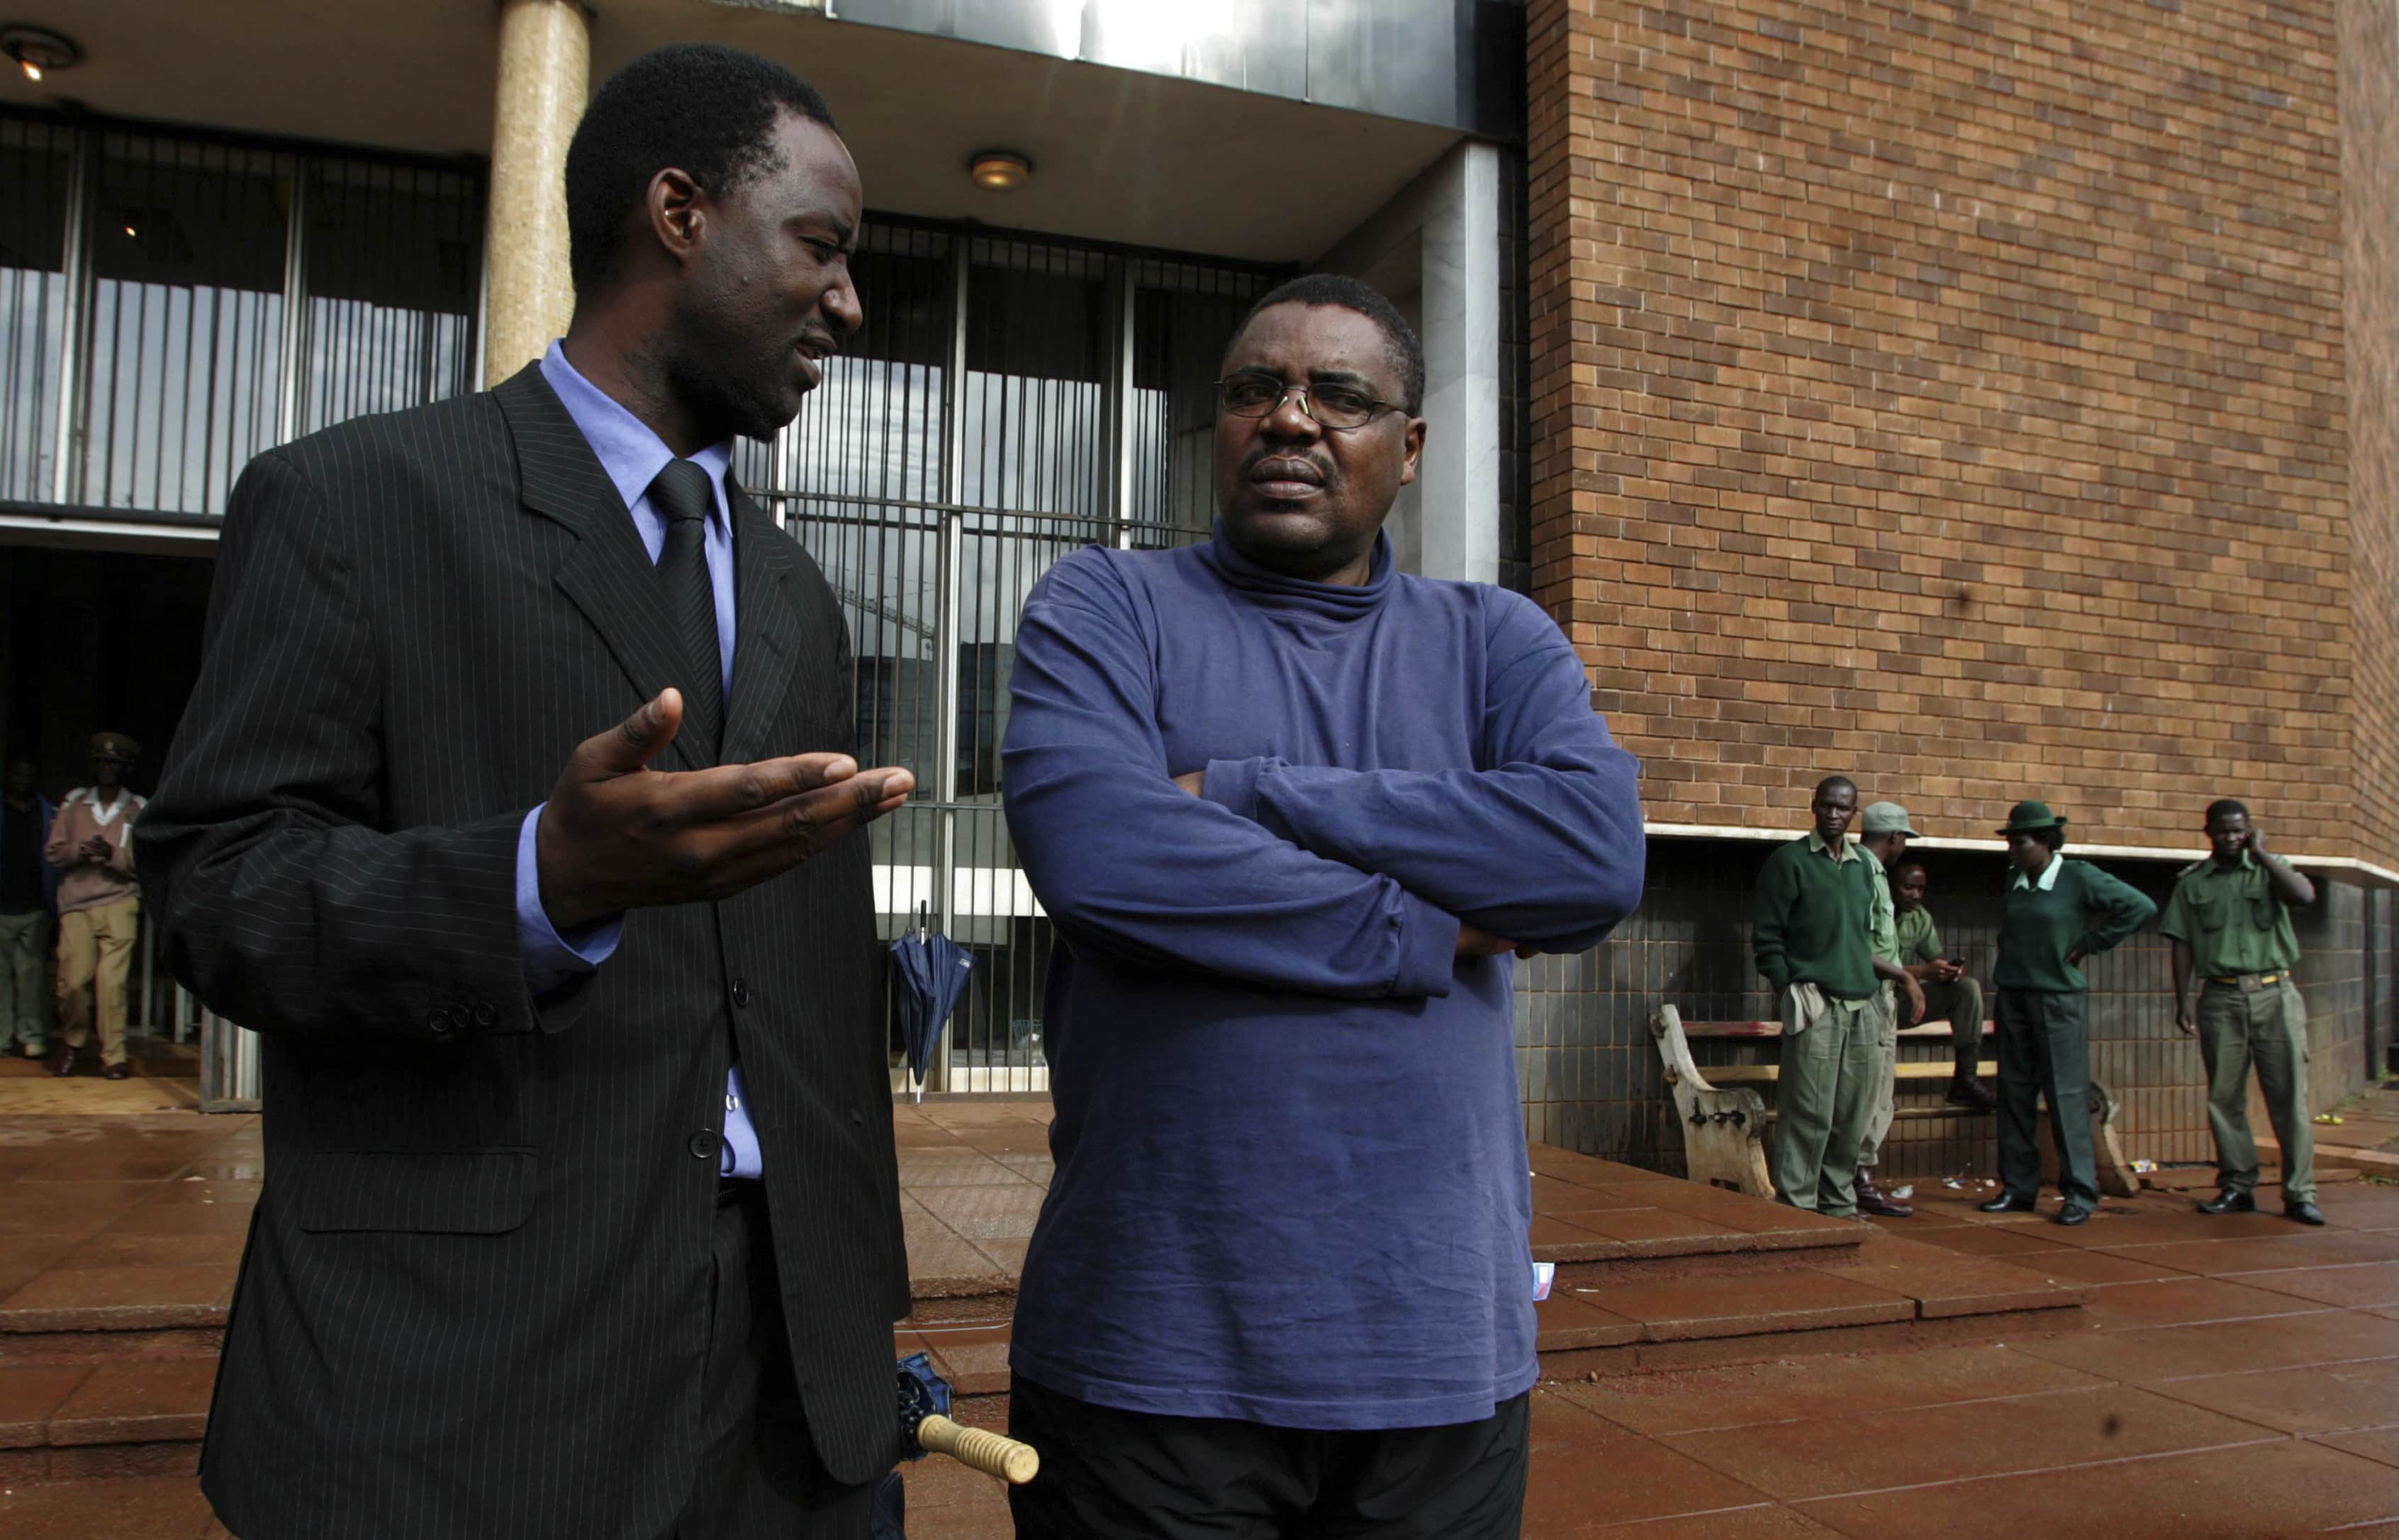 Nevanji Madanhire (C), editor of The Zimbabwe Standard Newspaper, talks to his lawyer as they leave the Harare Magistrates Court, 1 December 2010., REUTERS/Philimon Bulawayo